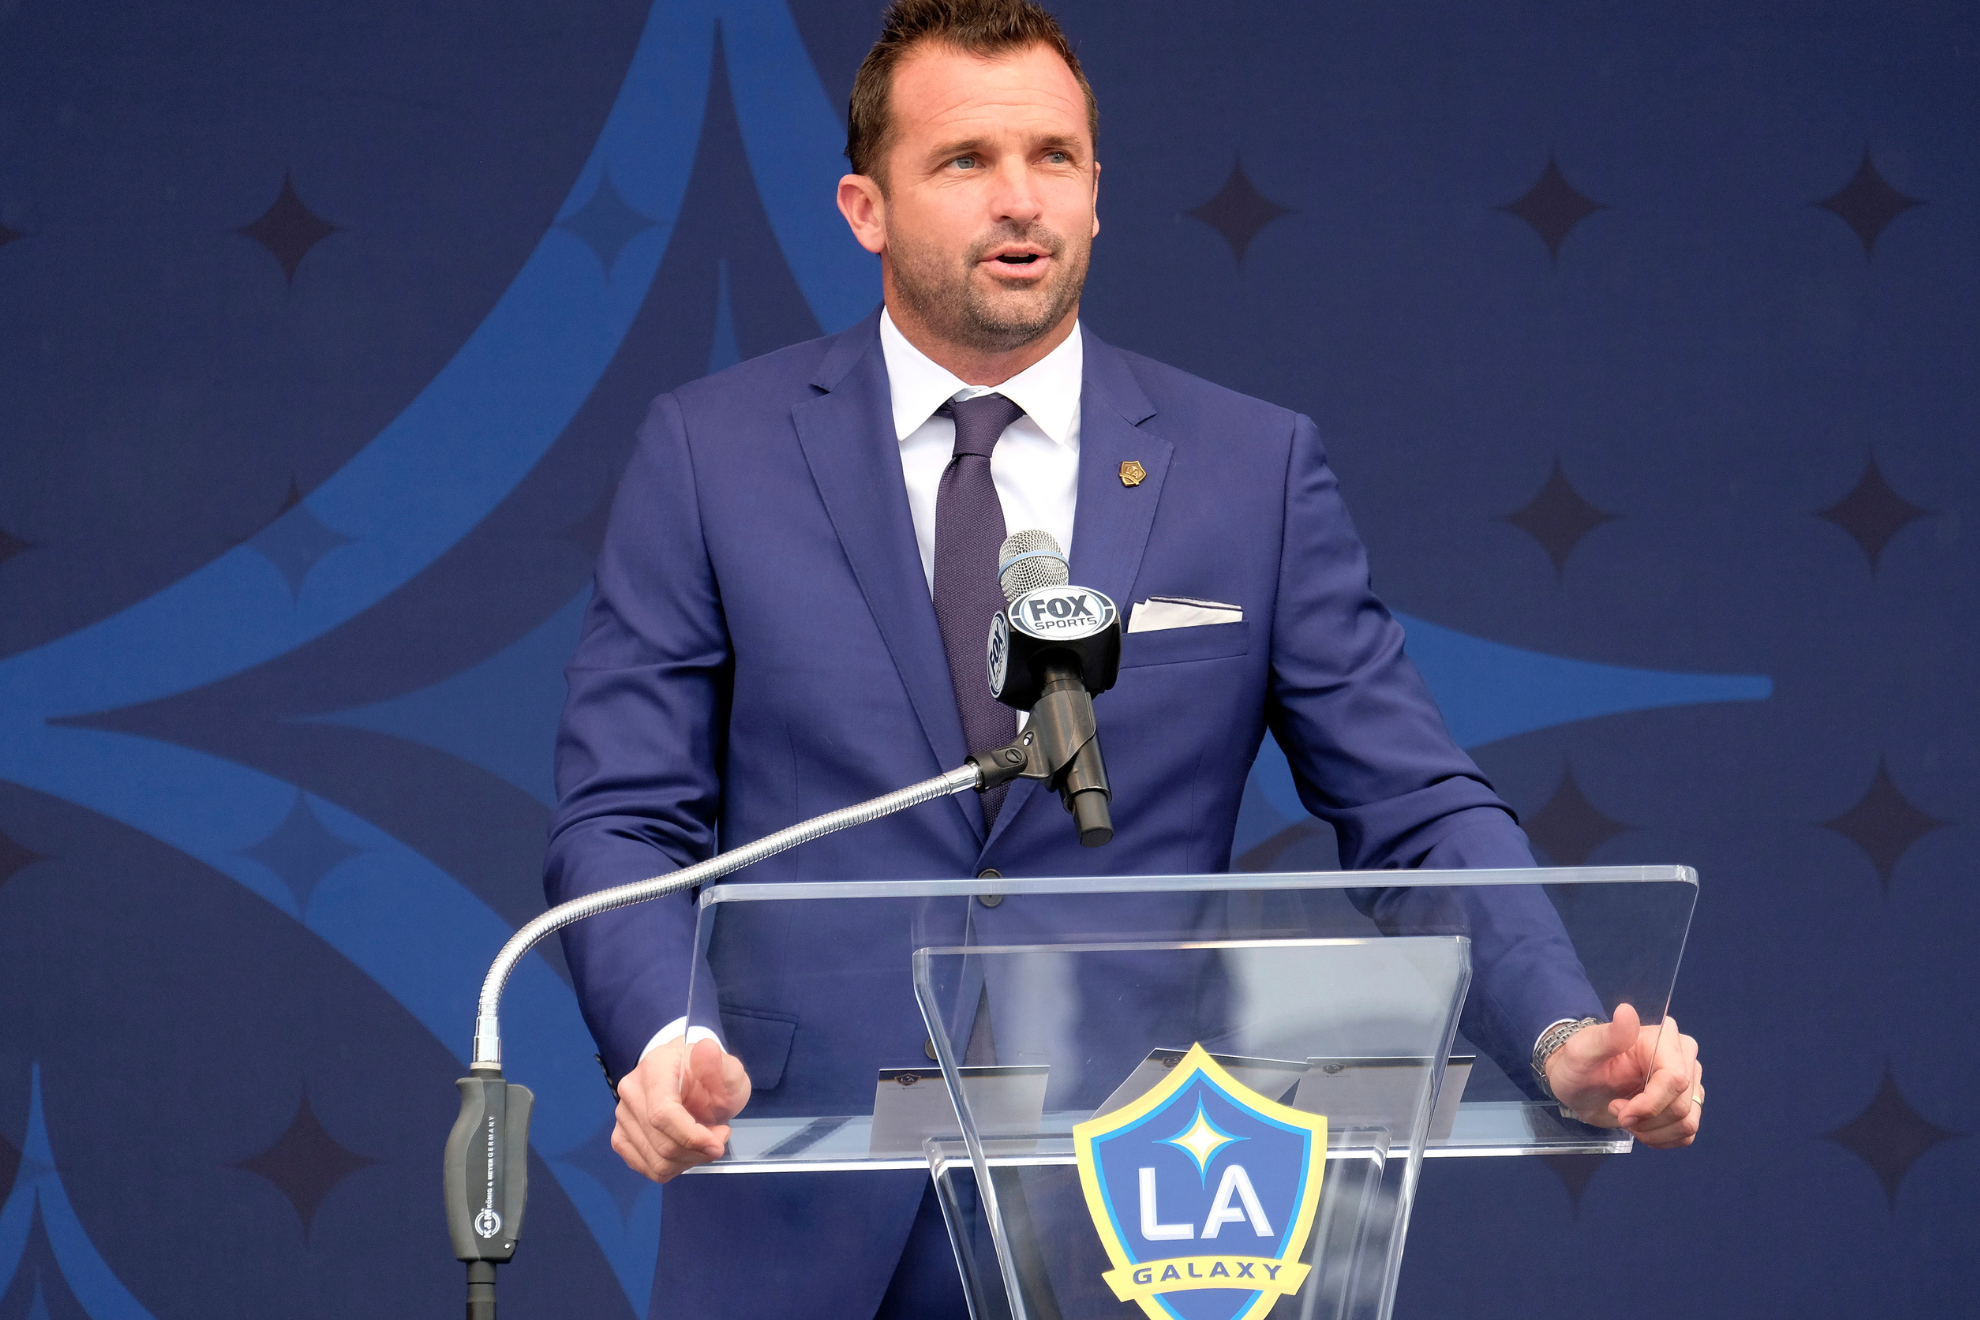 Klein had been the Galaxy's president since 2013.